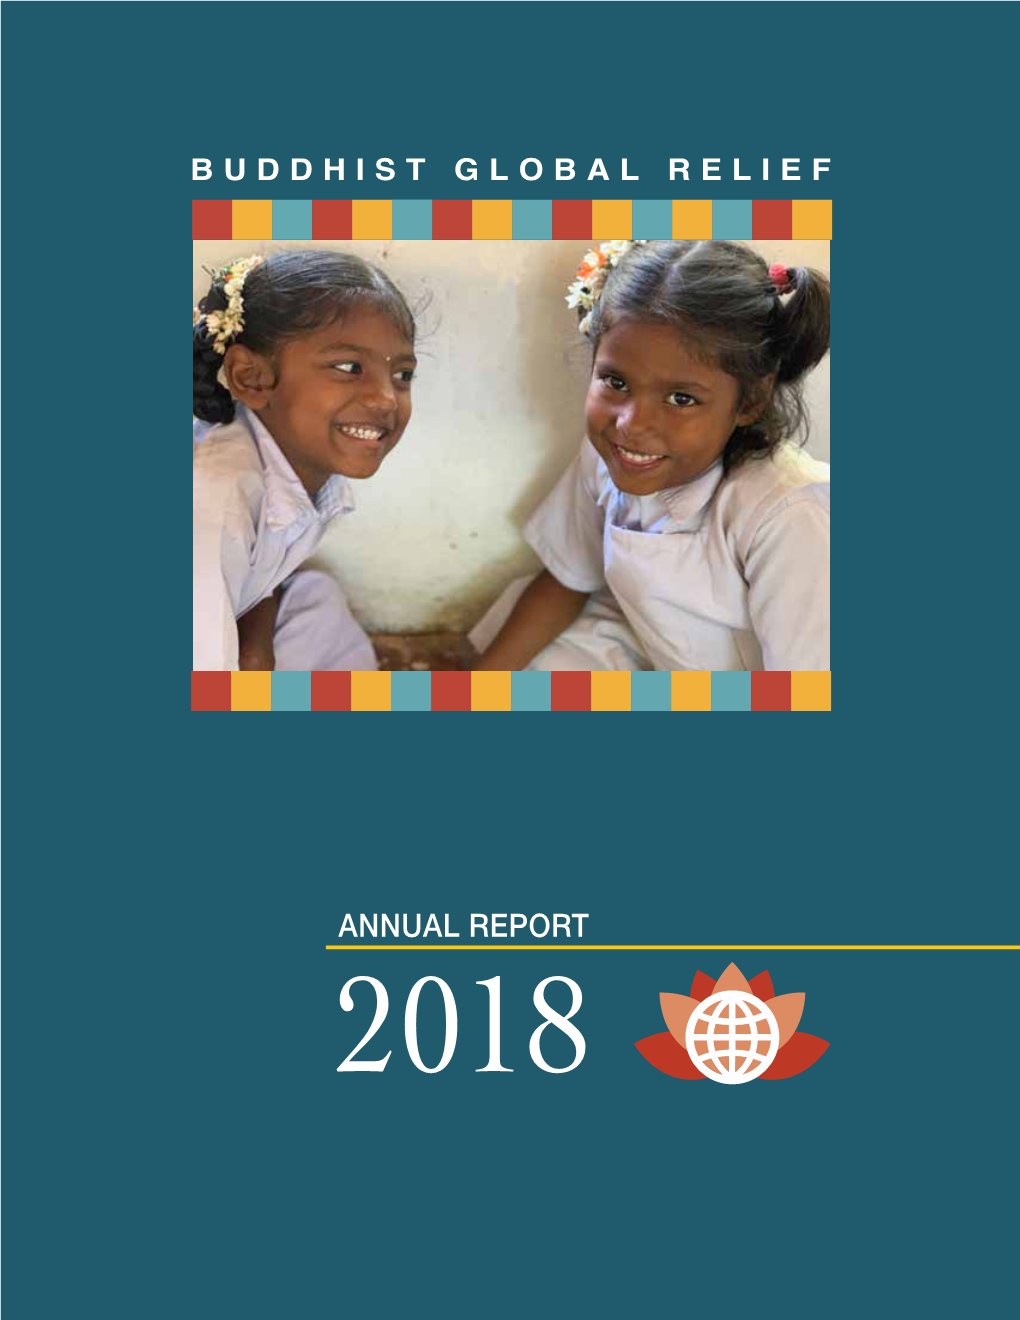 ANNUAL REPORT 2018 Cover Photo: White Lotus Charitable Trust, Garden of Peace Nutritional Support Program in India